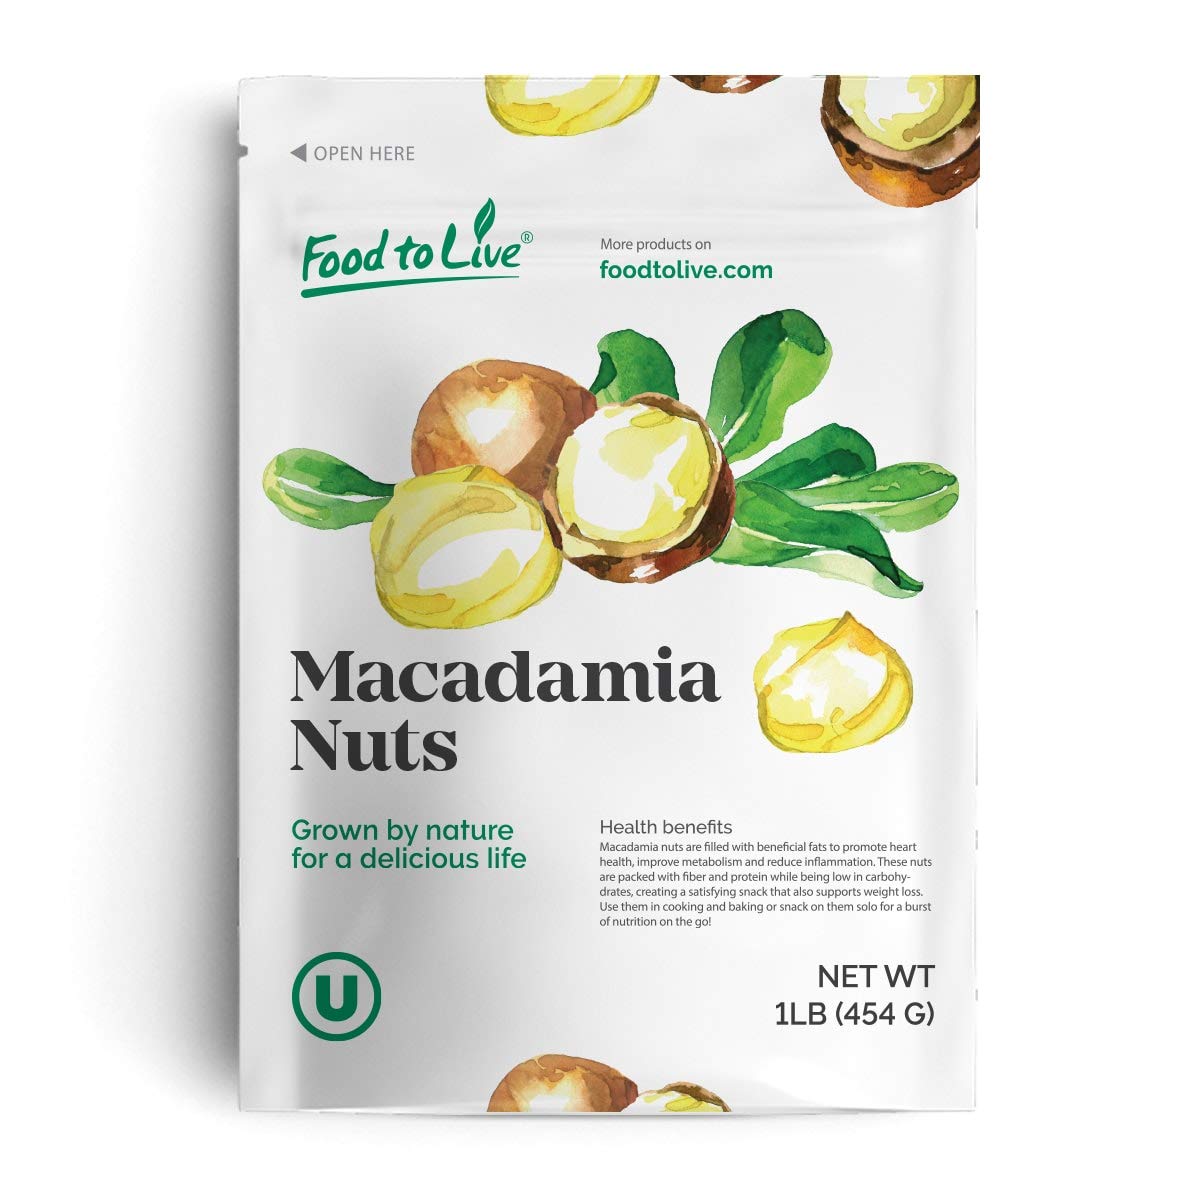 Dry Roasted Macadamia Nuts – Oven Roasted Whole Nuts, Unsalted, No Oil Added, Great Vegan Snack, Keto, Kosher, Bulk. High in Protein and Healthy Fats. Great for Baking